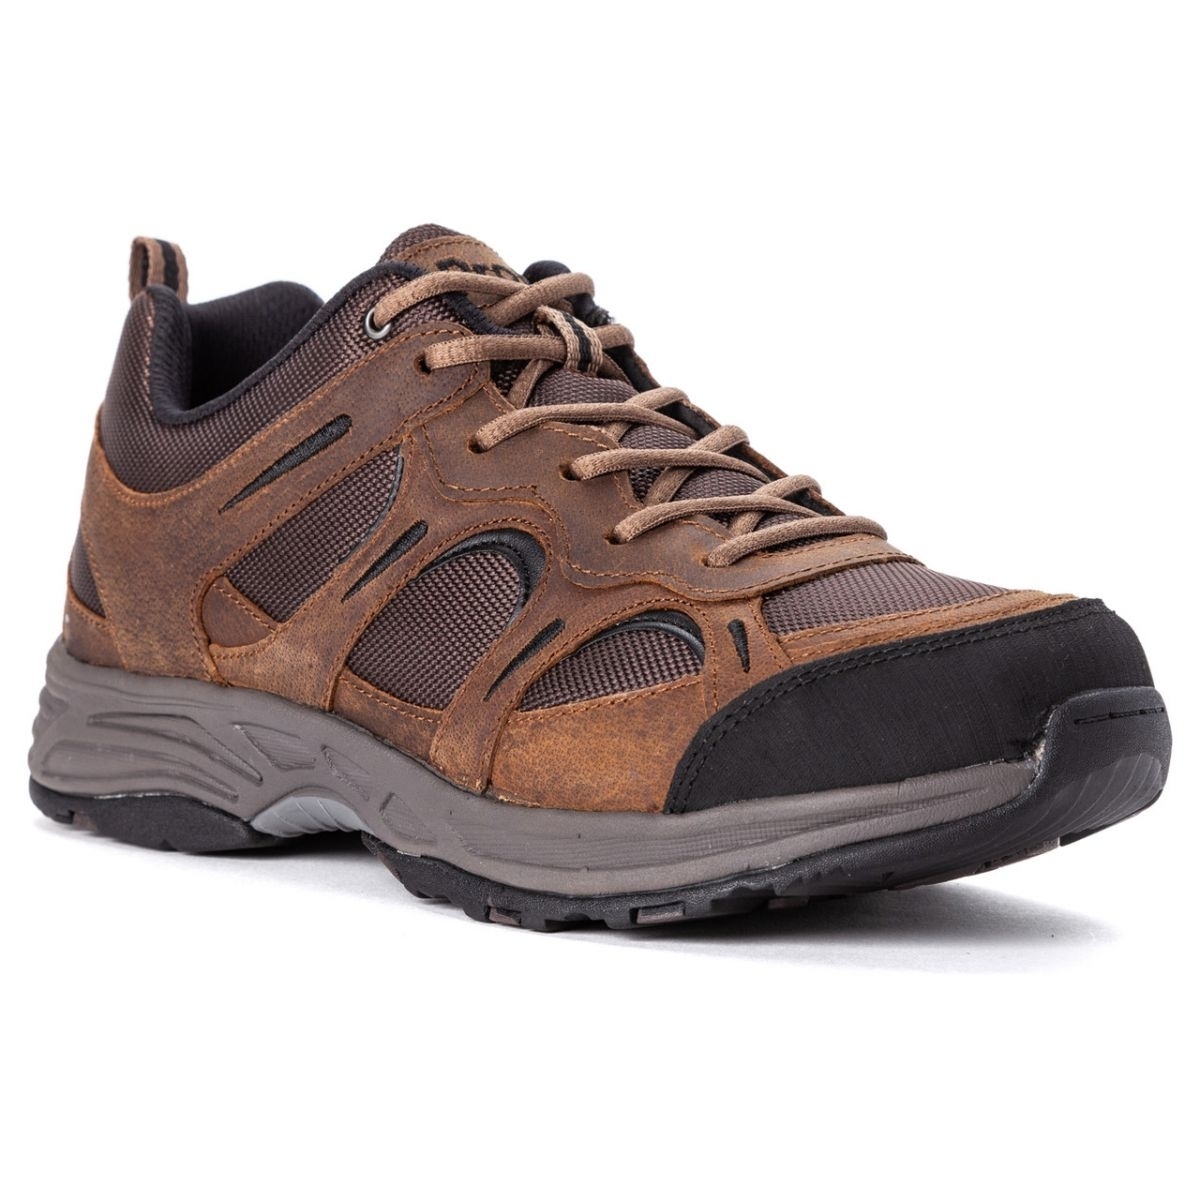 Propet Men's Connelly Hiking Shoe Brown - M5503BR BROWN - BROWN, 11-E